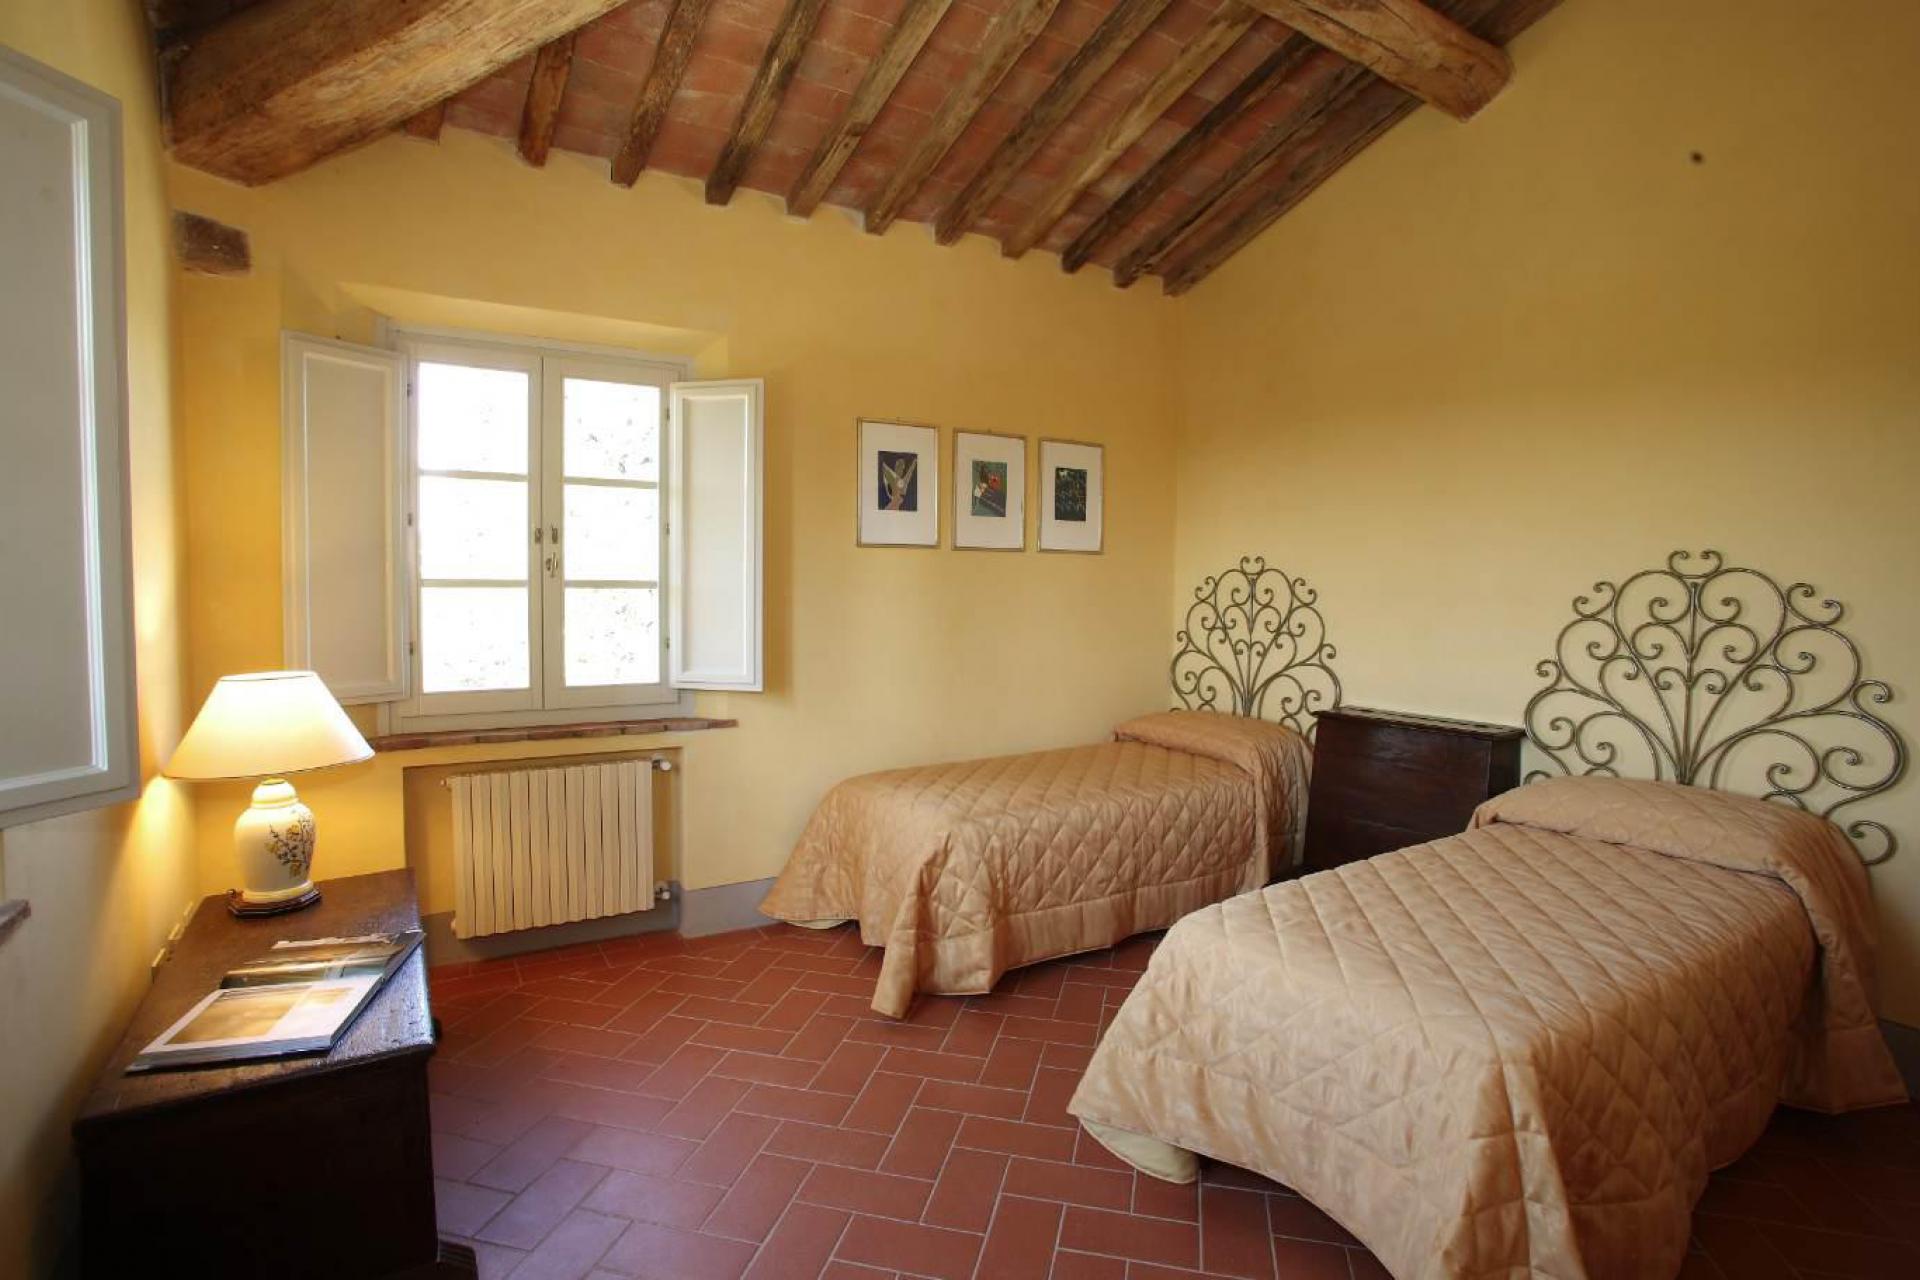 Hospitable and cozy agriturismo for families